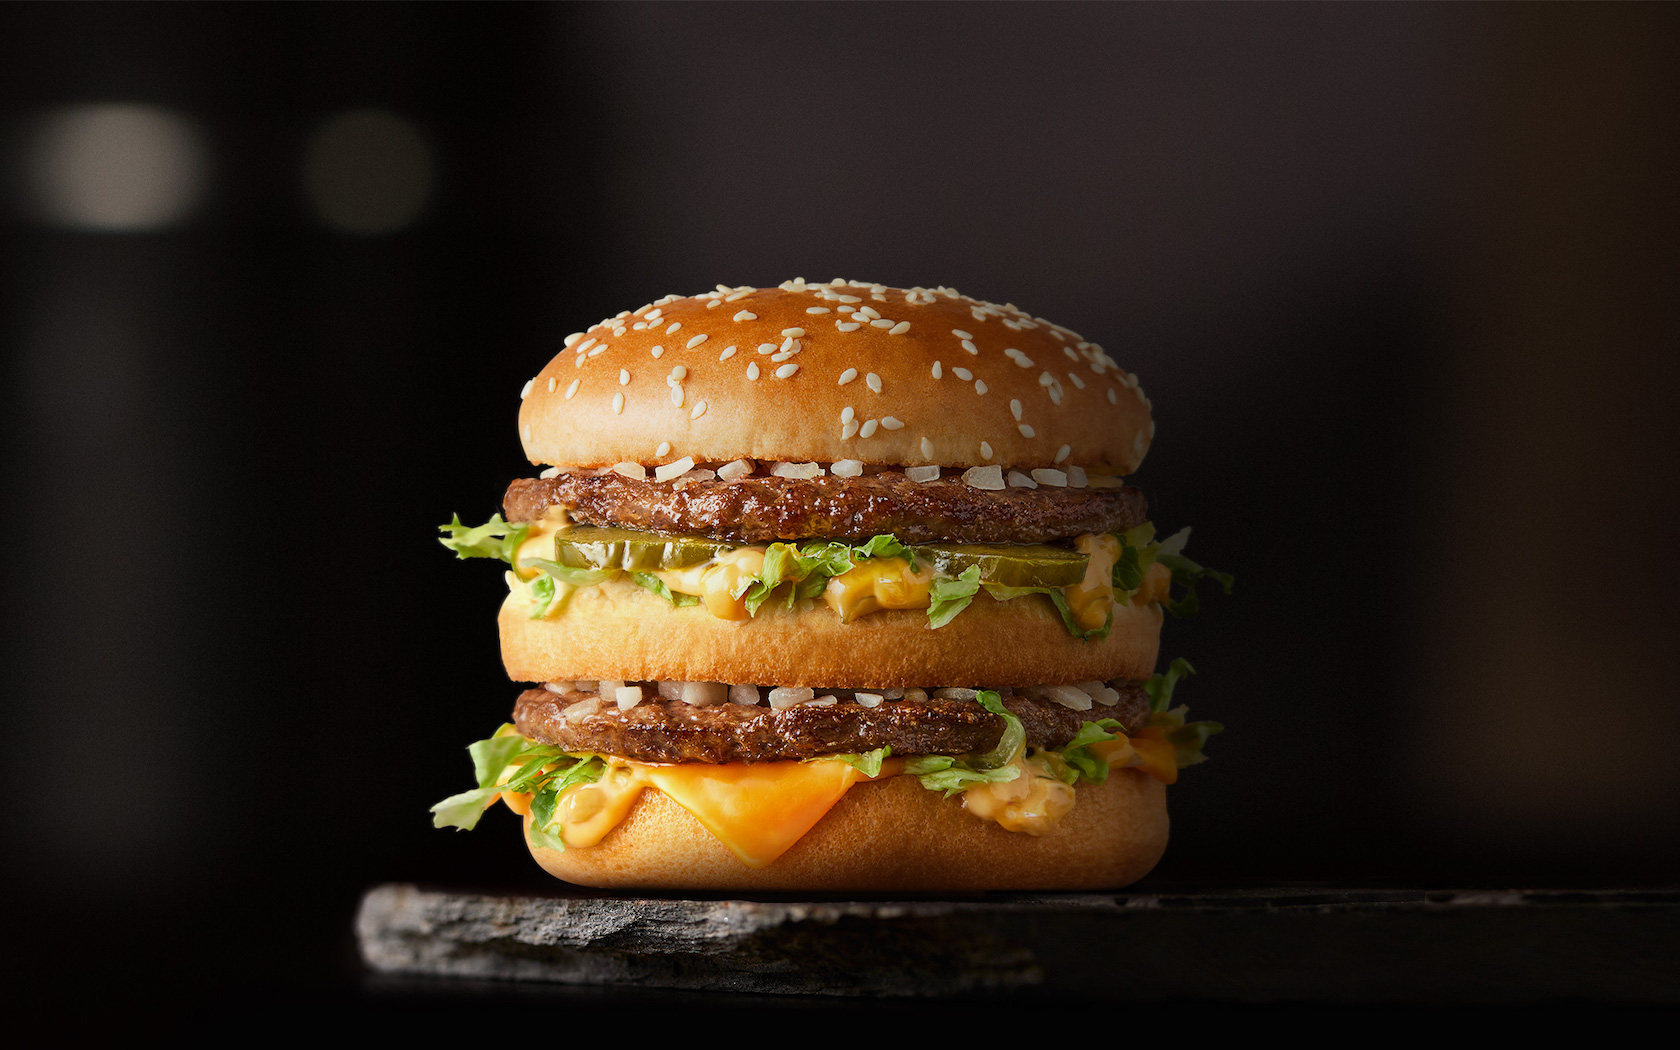 McDonald's Delivery: Get Free Delivery Every Weekend Until June